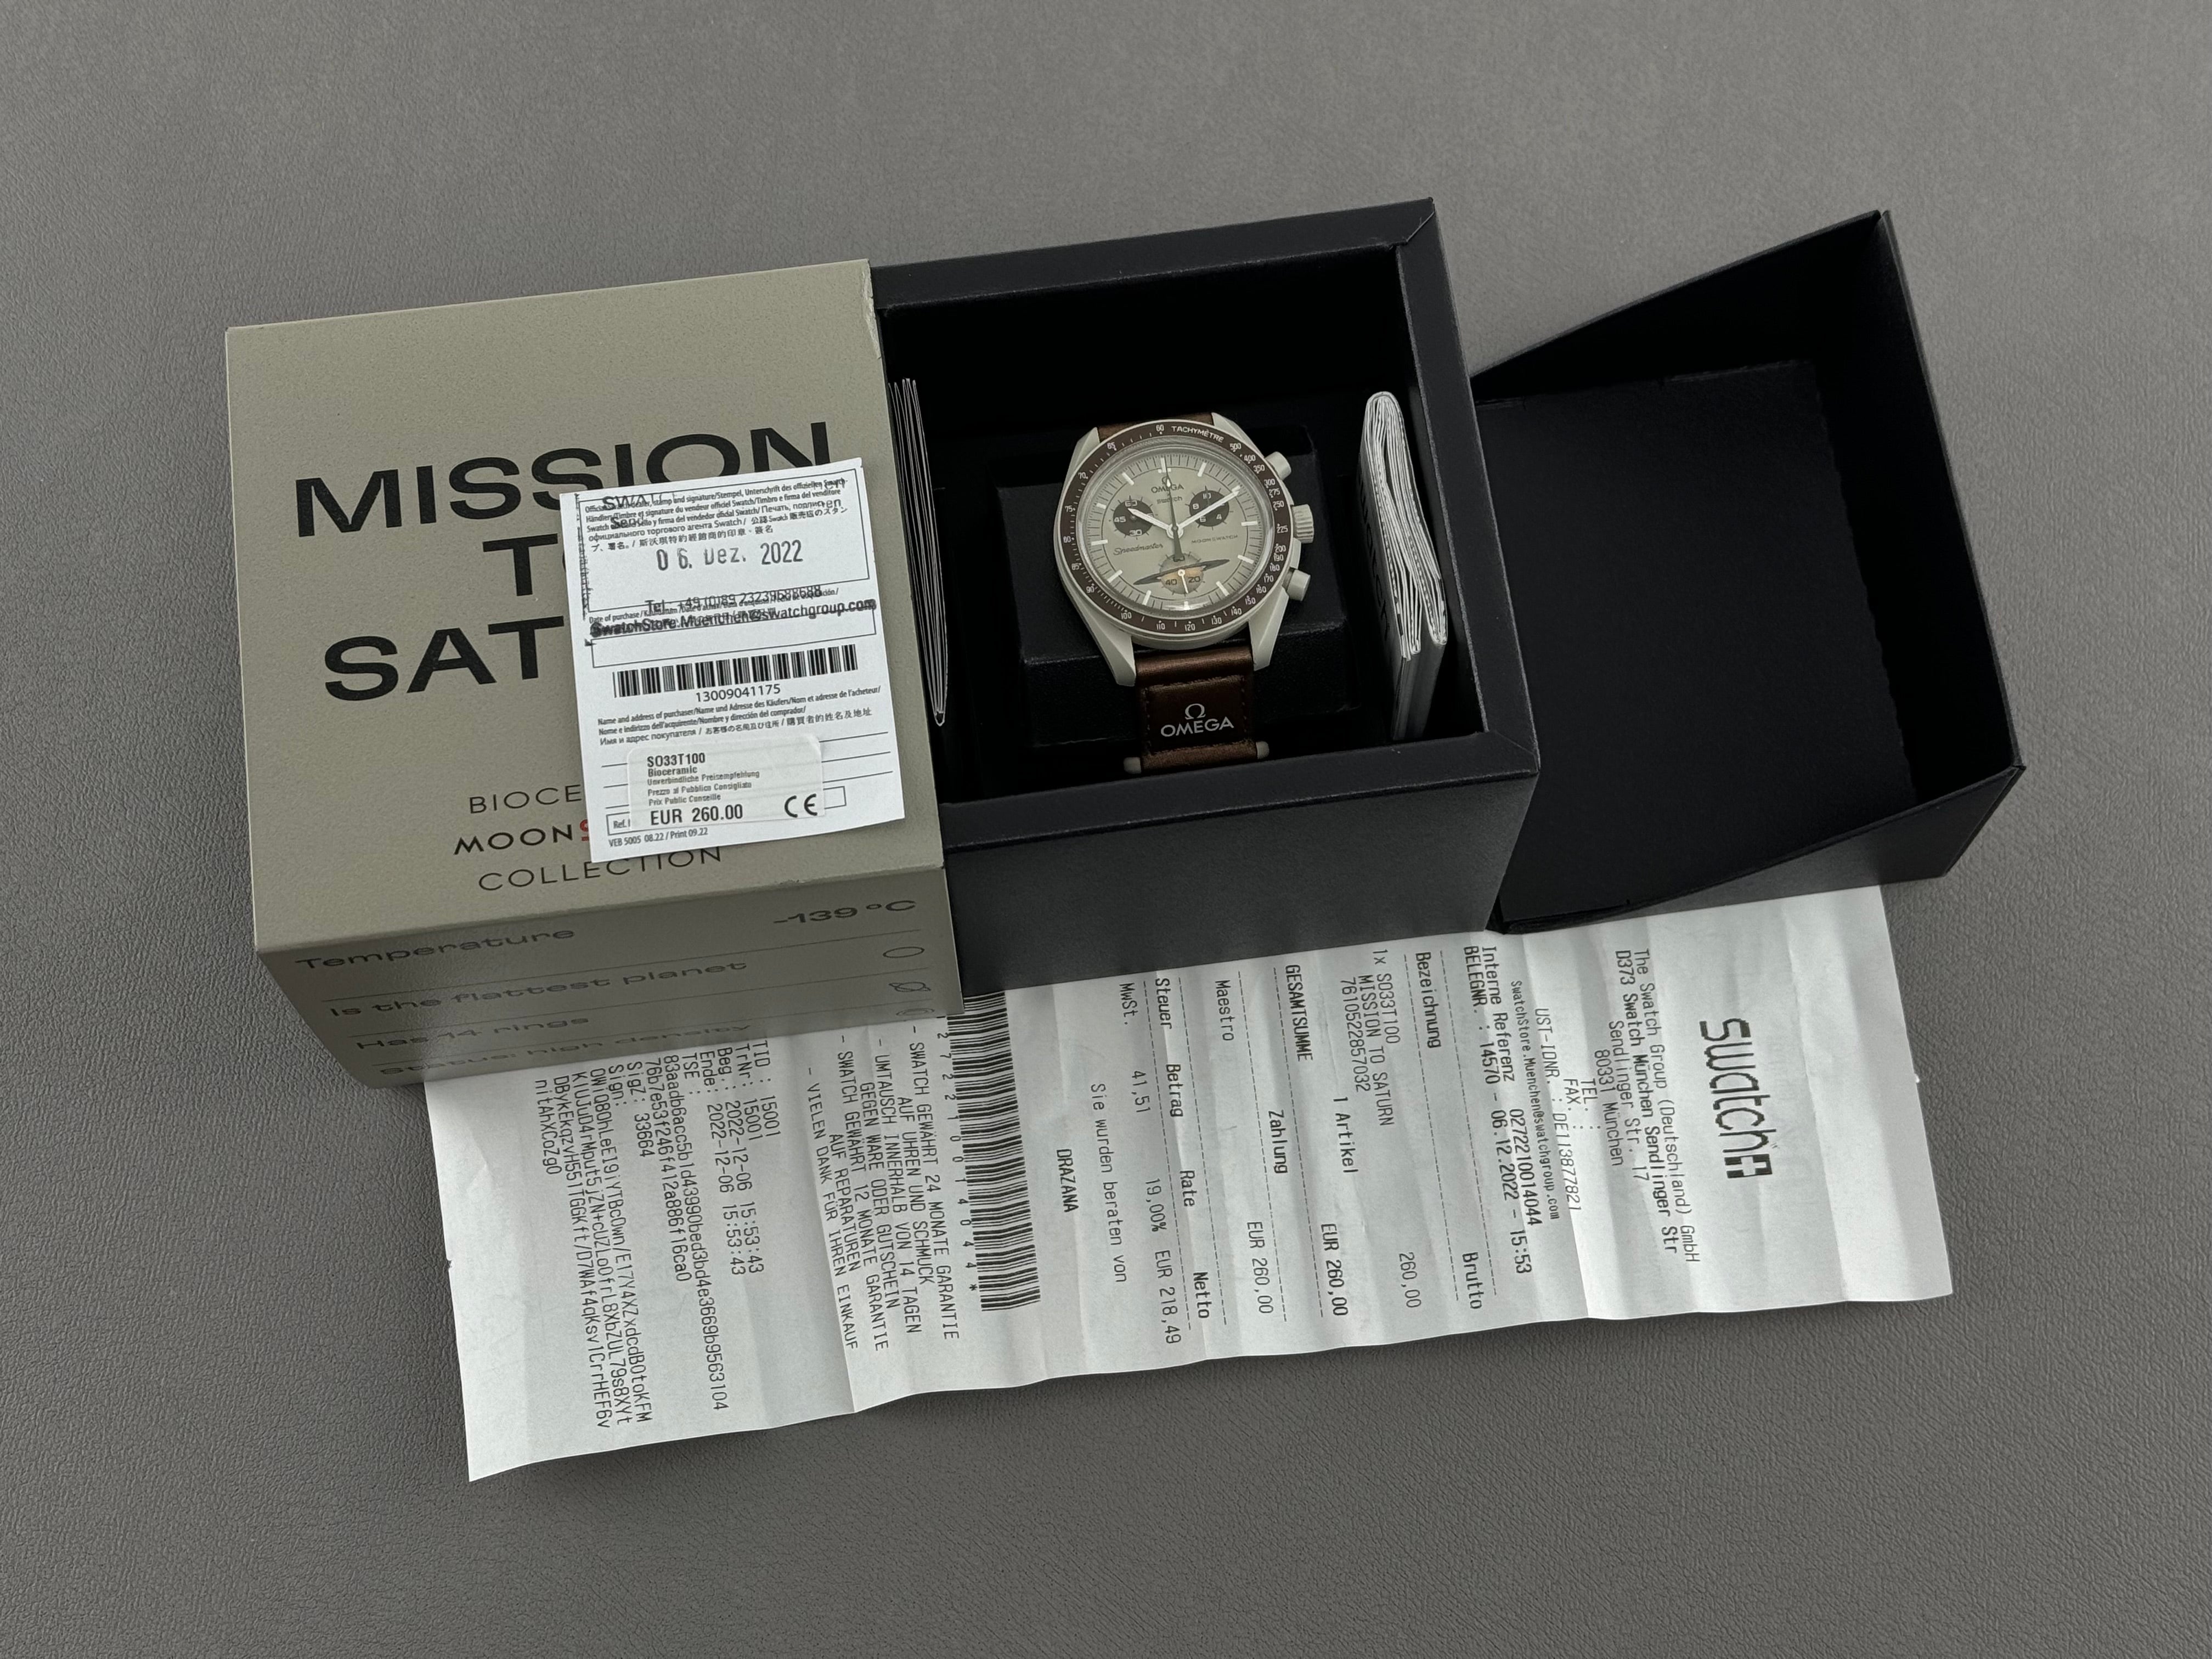 Omega x Swatch MoonSwatch mission to Saturn SO33T100 